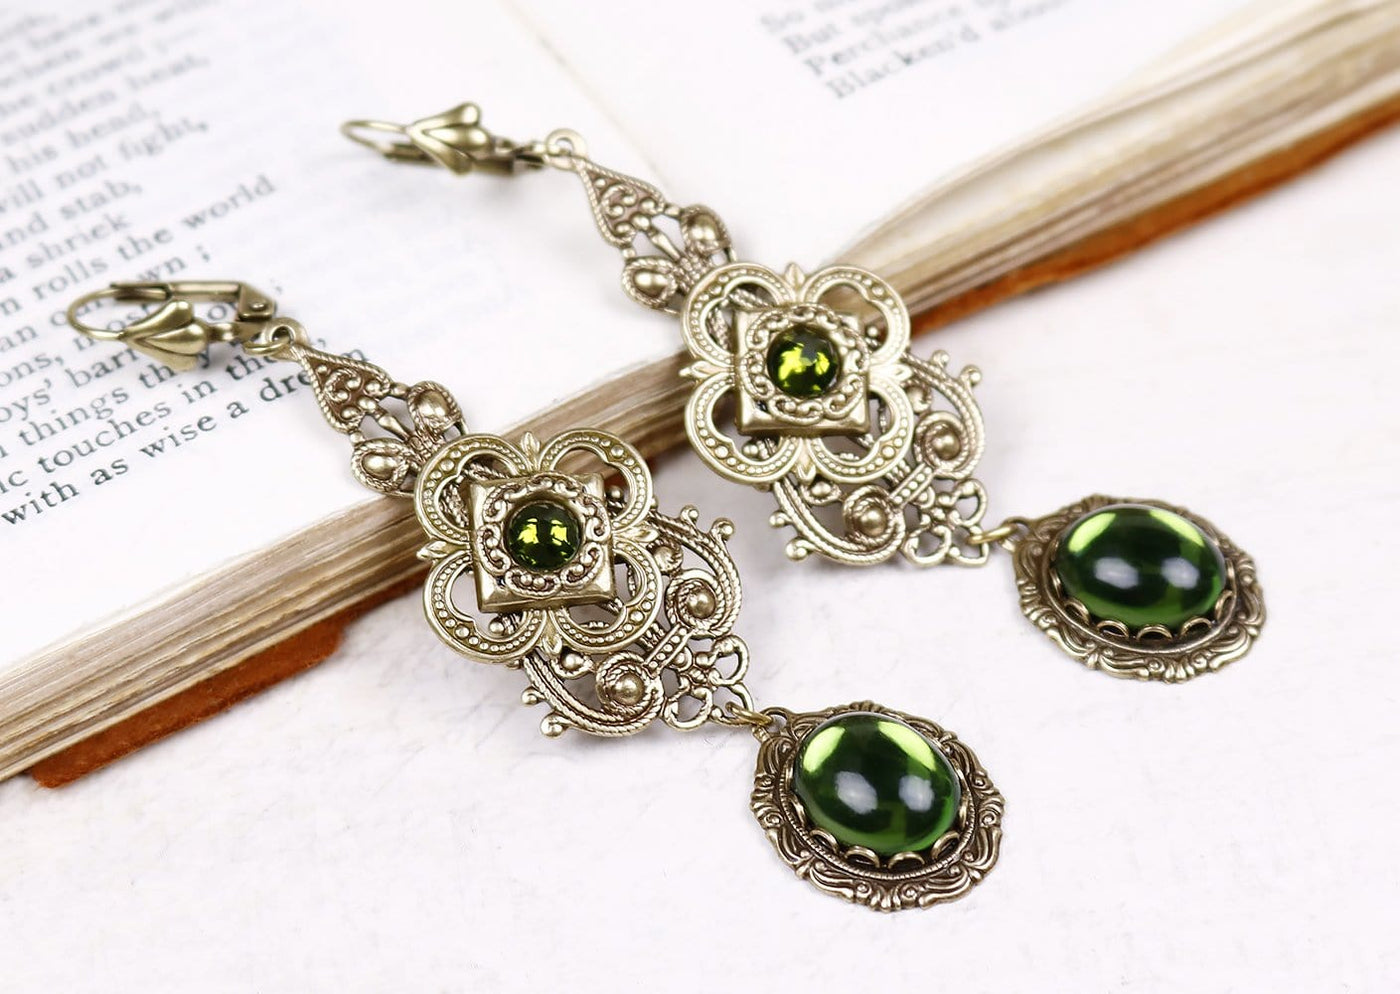 Avalon Earrings in Olivine and Antiqued Brass by Rabbitwood & Reason